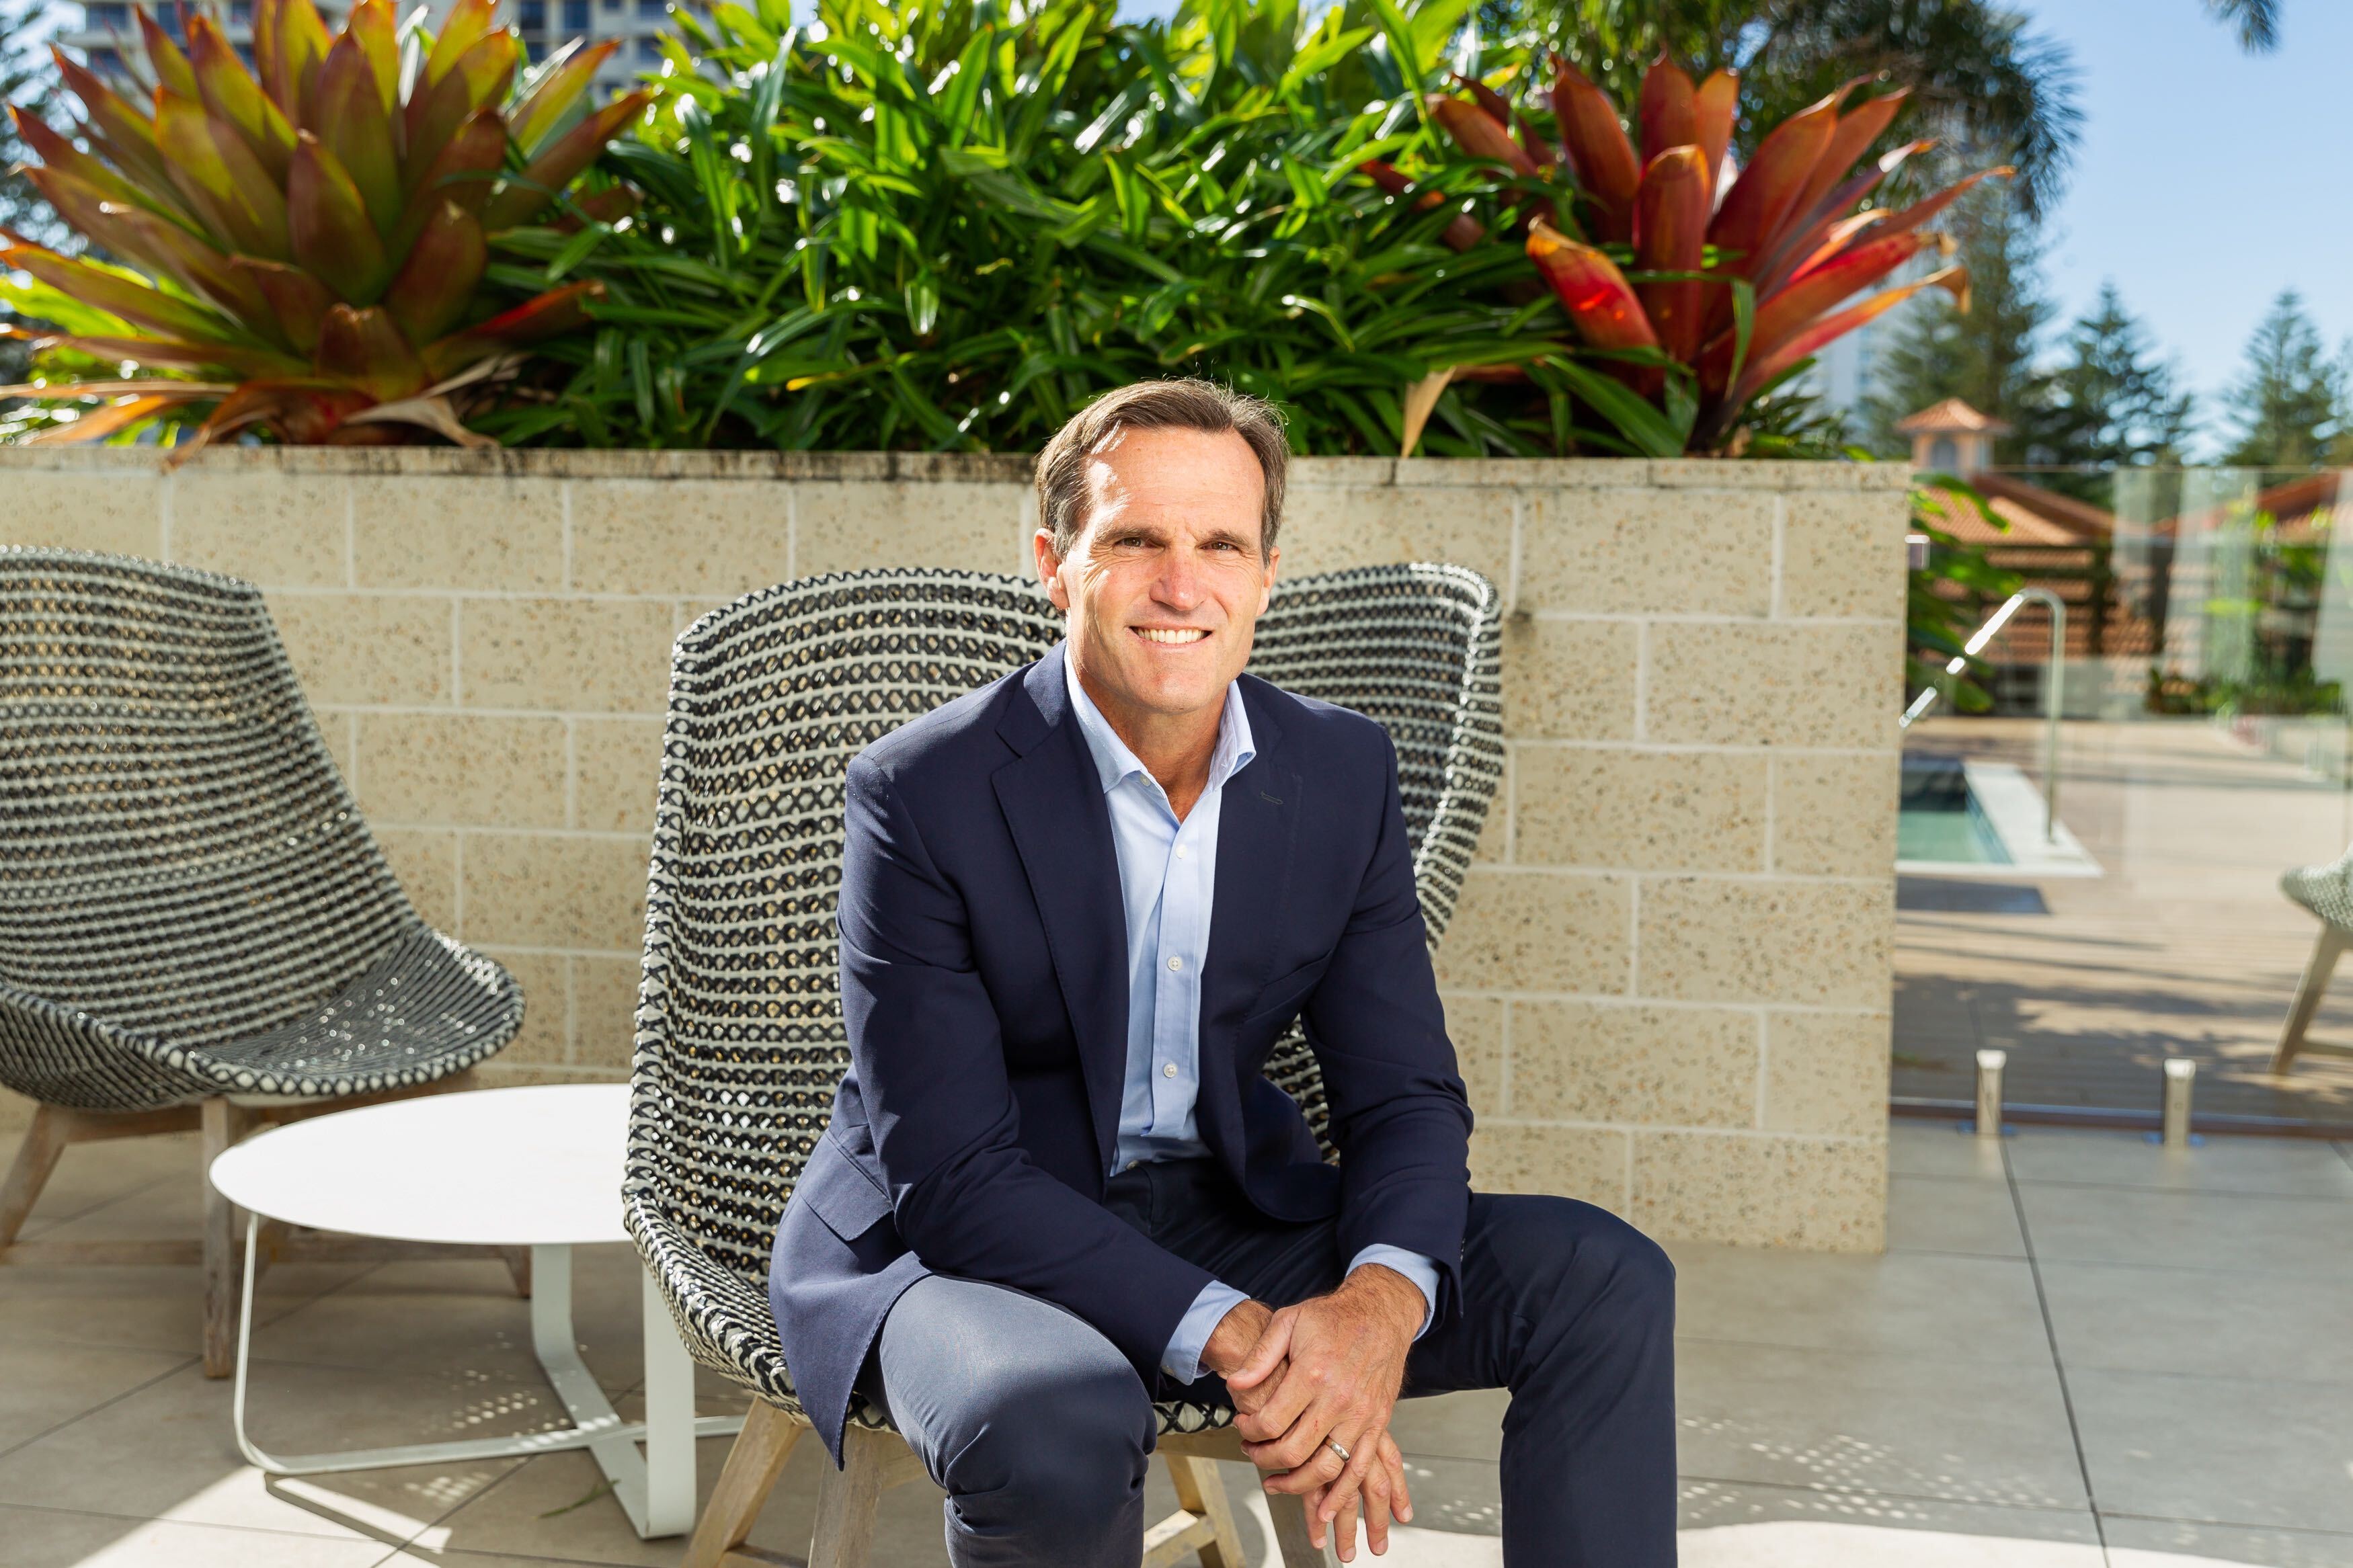 Rays of sunshine reach those in need with SDA and spinal research: an exclusive talk with Gold Coast property developer and spinal research advocate, Tom Ray.